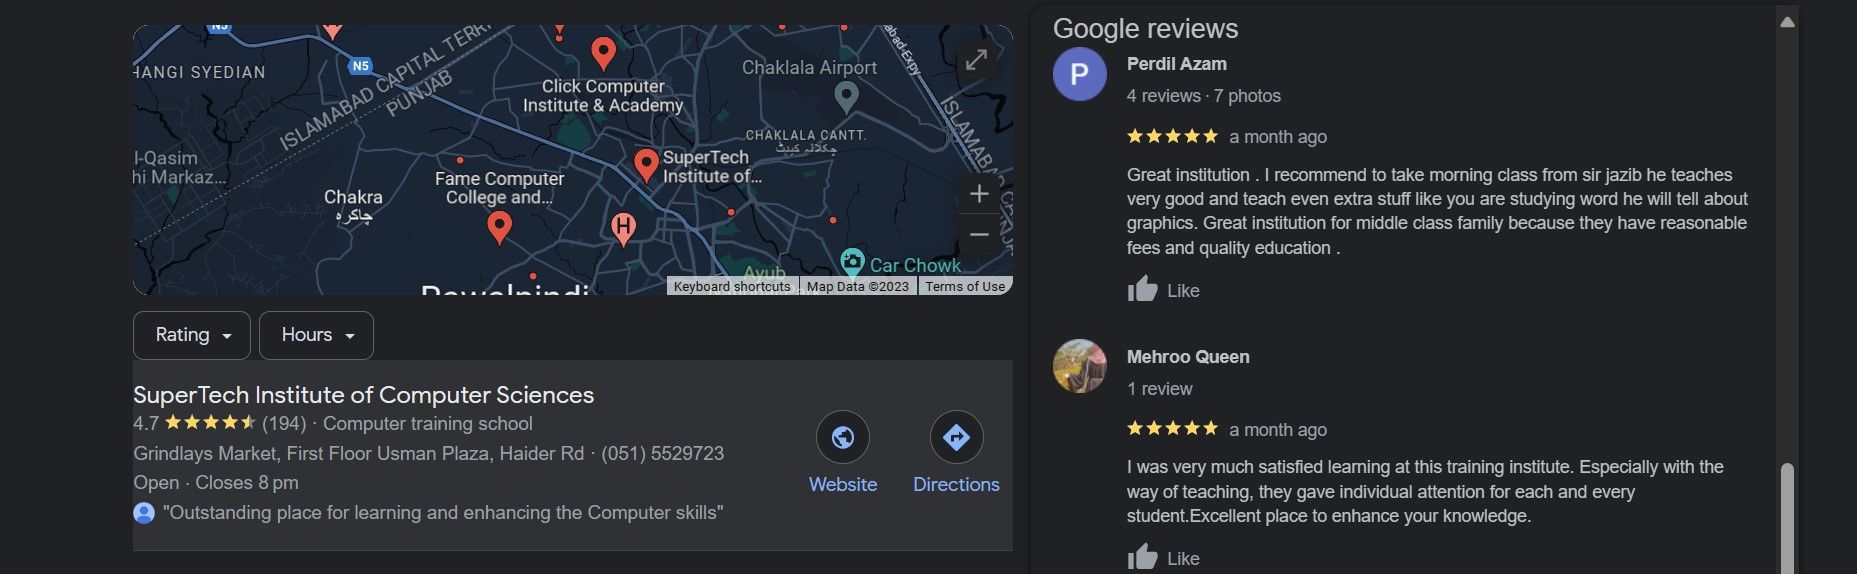 Check Reviews on the Google Business Account